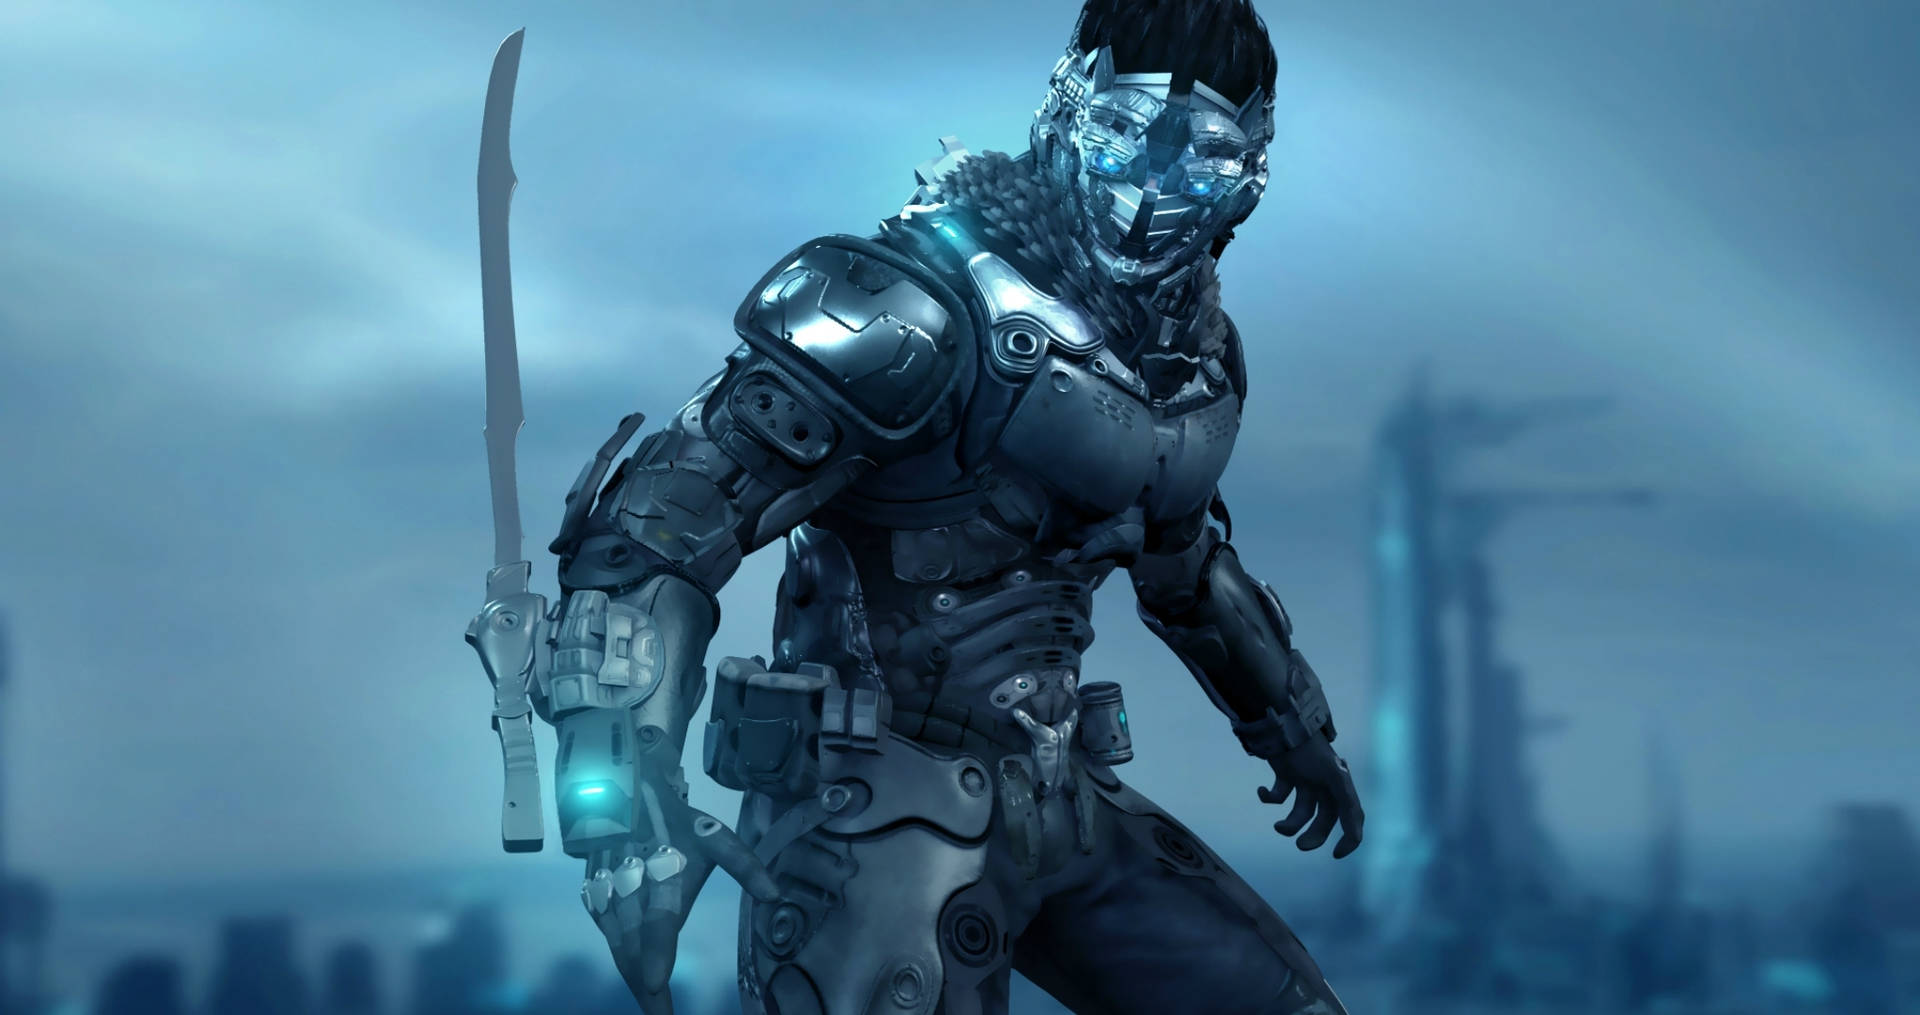 Sword And Armored Warrior Of Cyberpunk Background